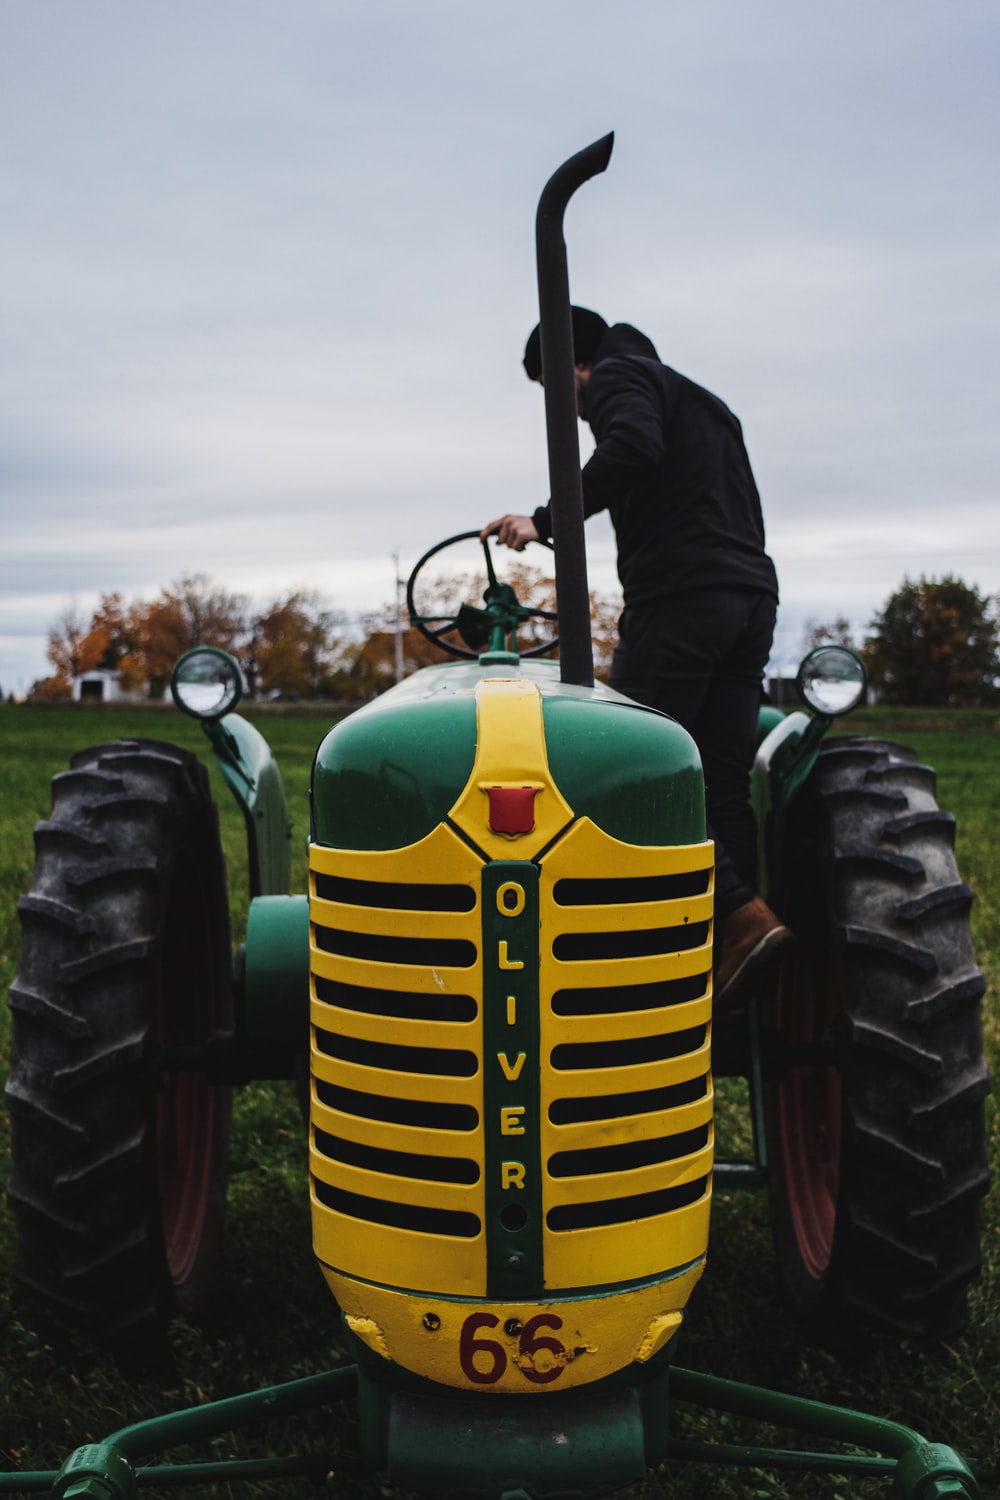 Old Tractor Picture. Download Free Image